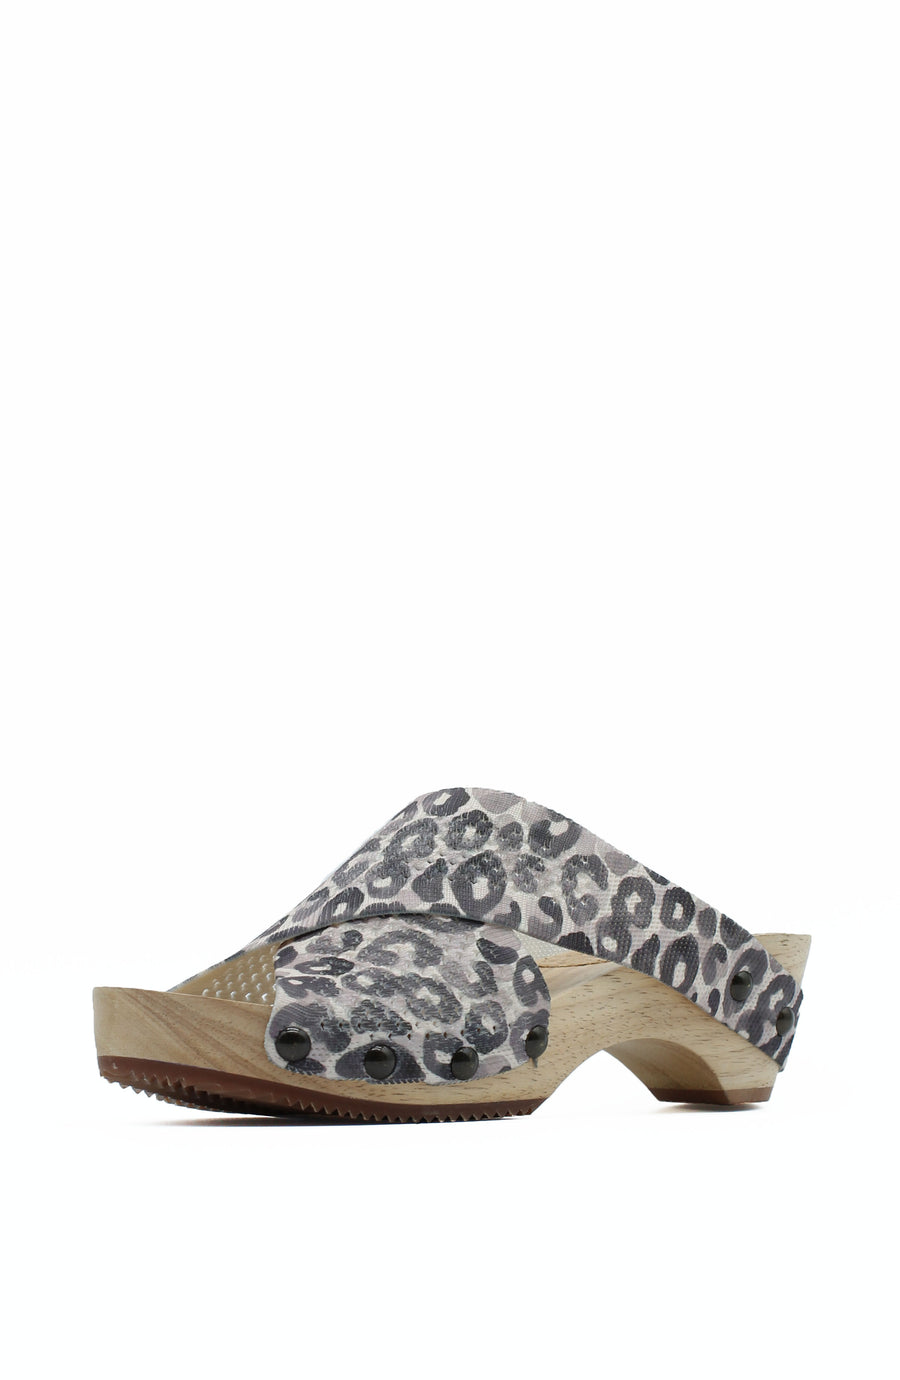 CLEARANCE - LIBBY HILL in LEOPARD